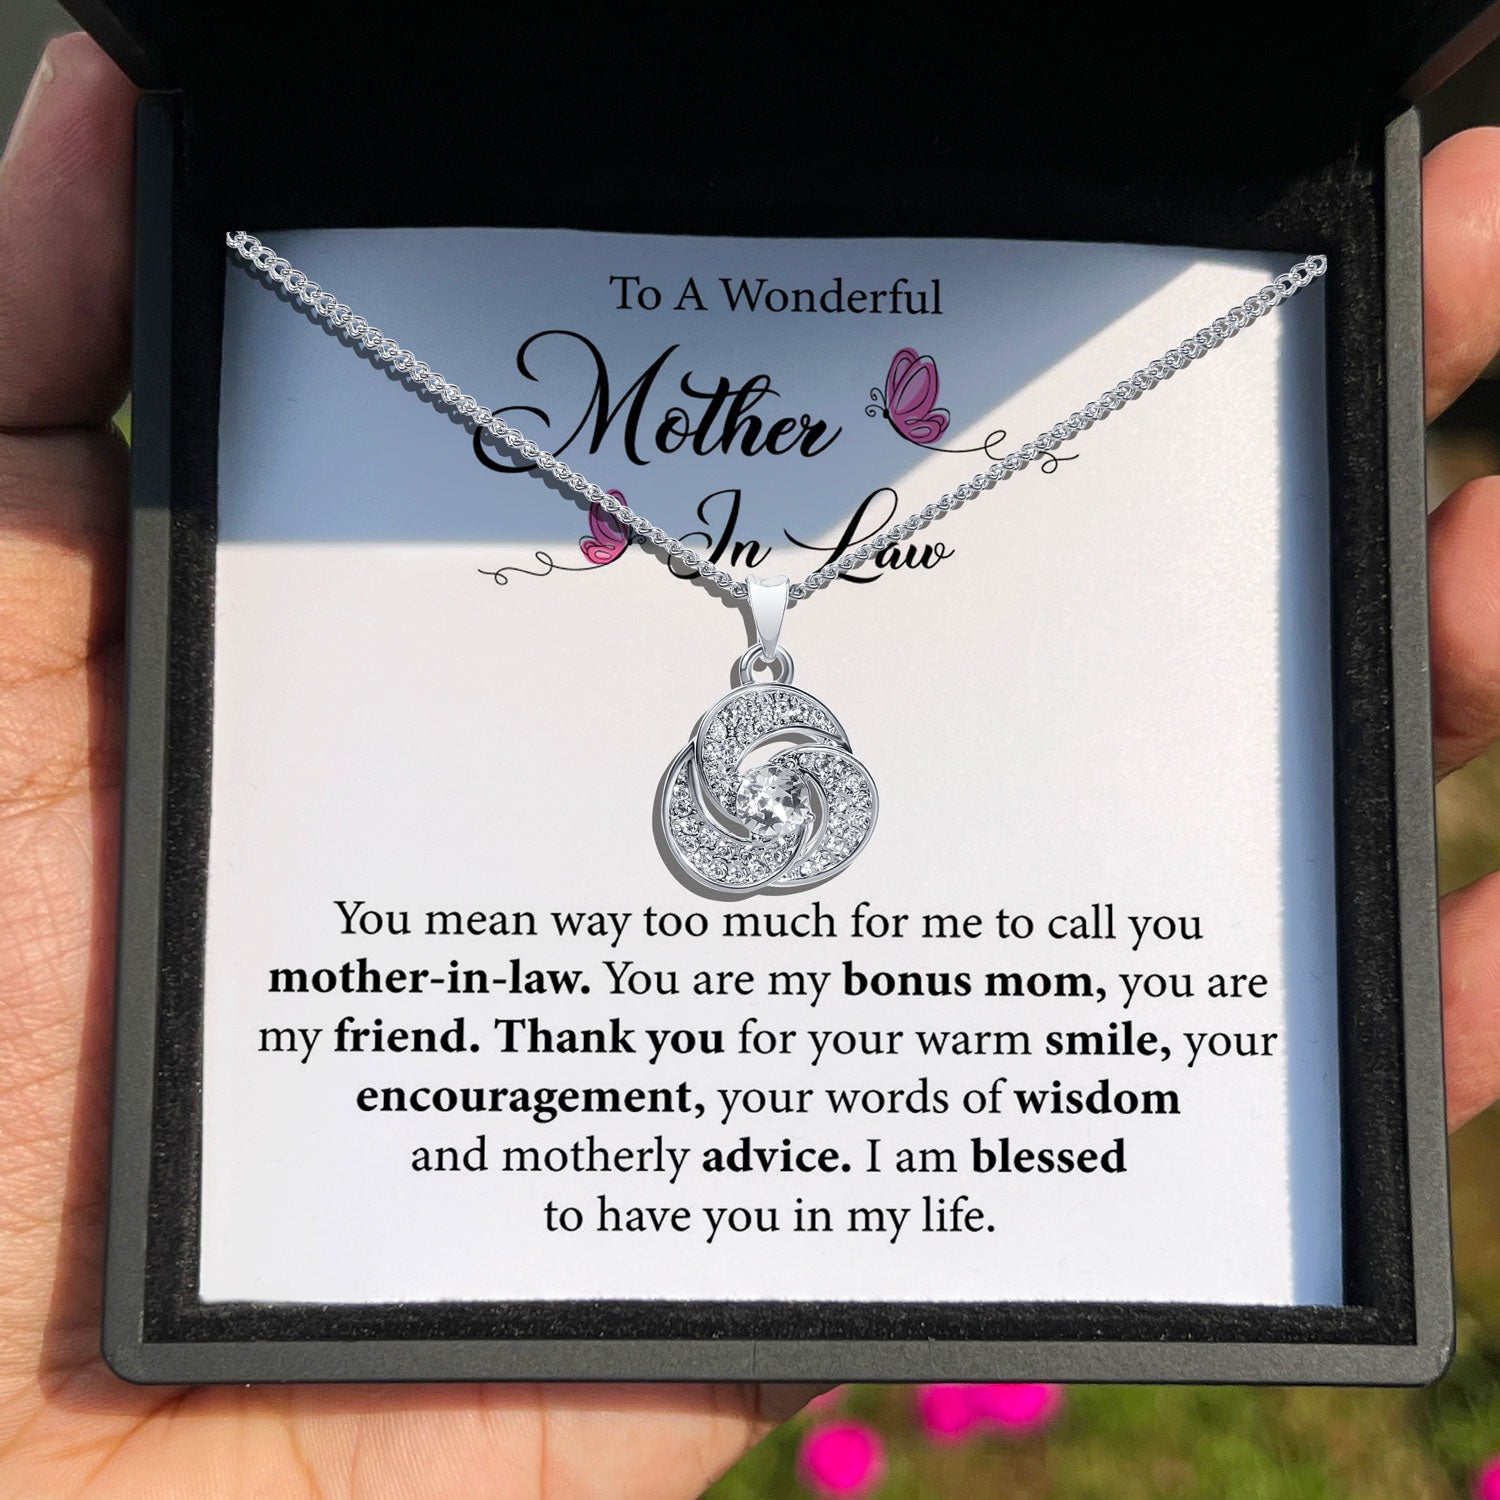 To My Wonderful Mother in Law - You Are My Bonus Mom - Tryndi Love Knot Necklace